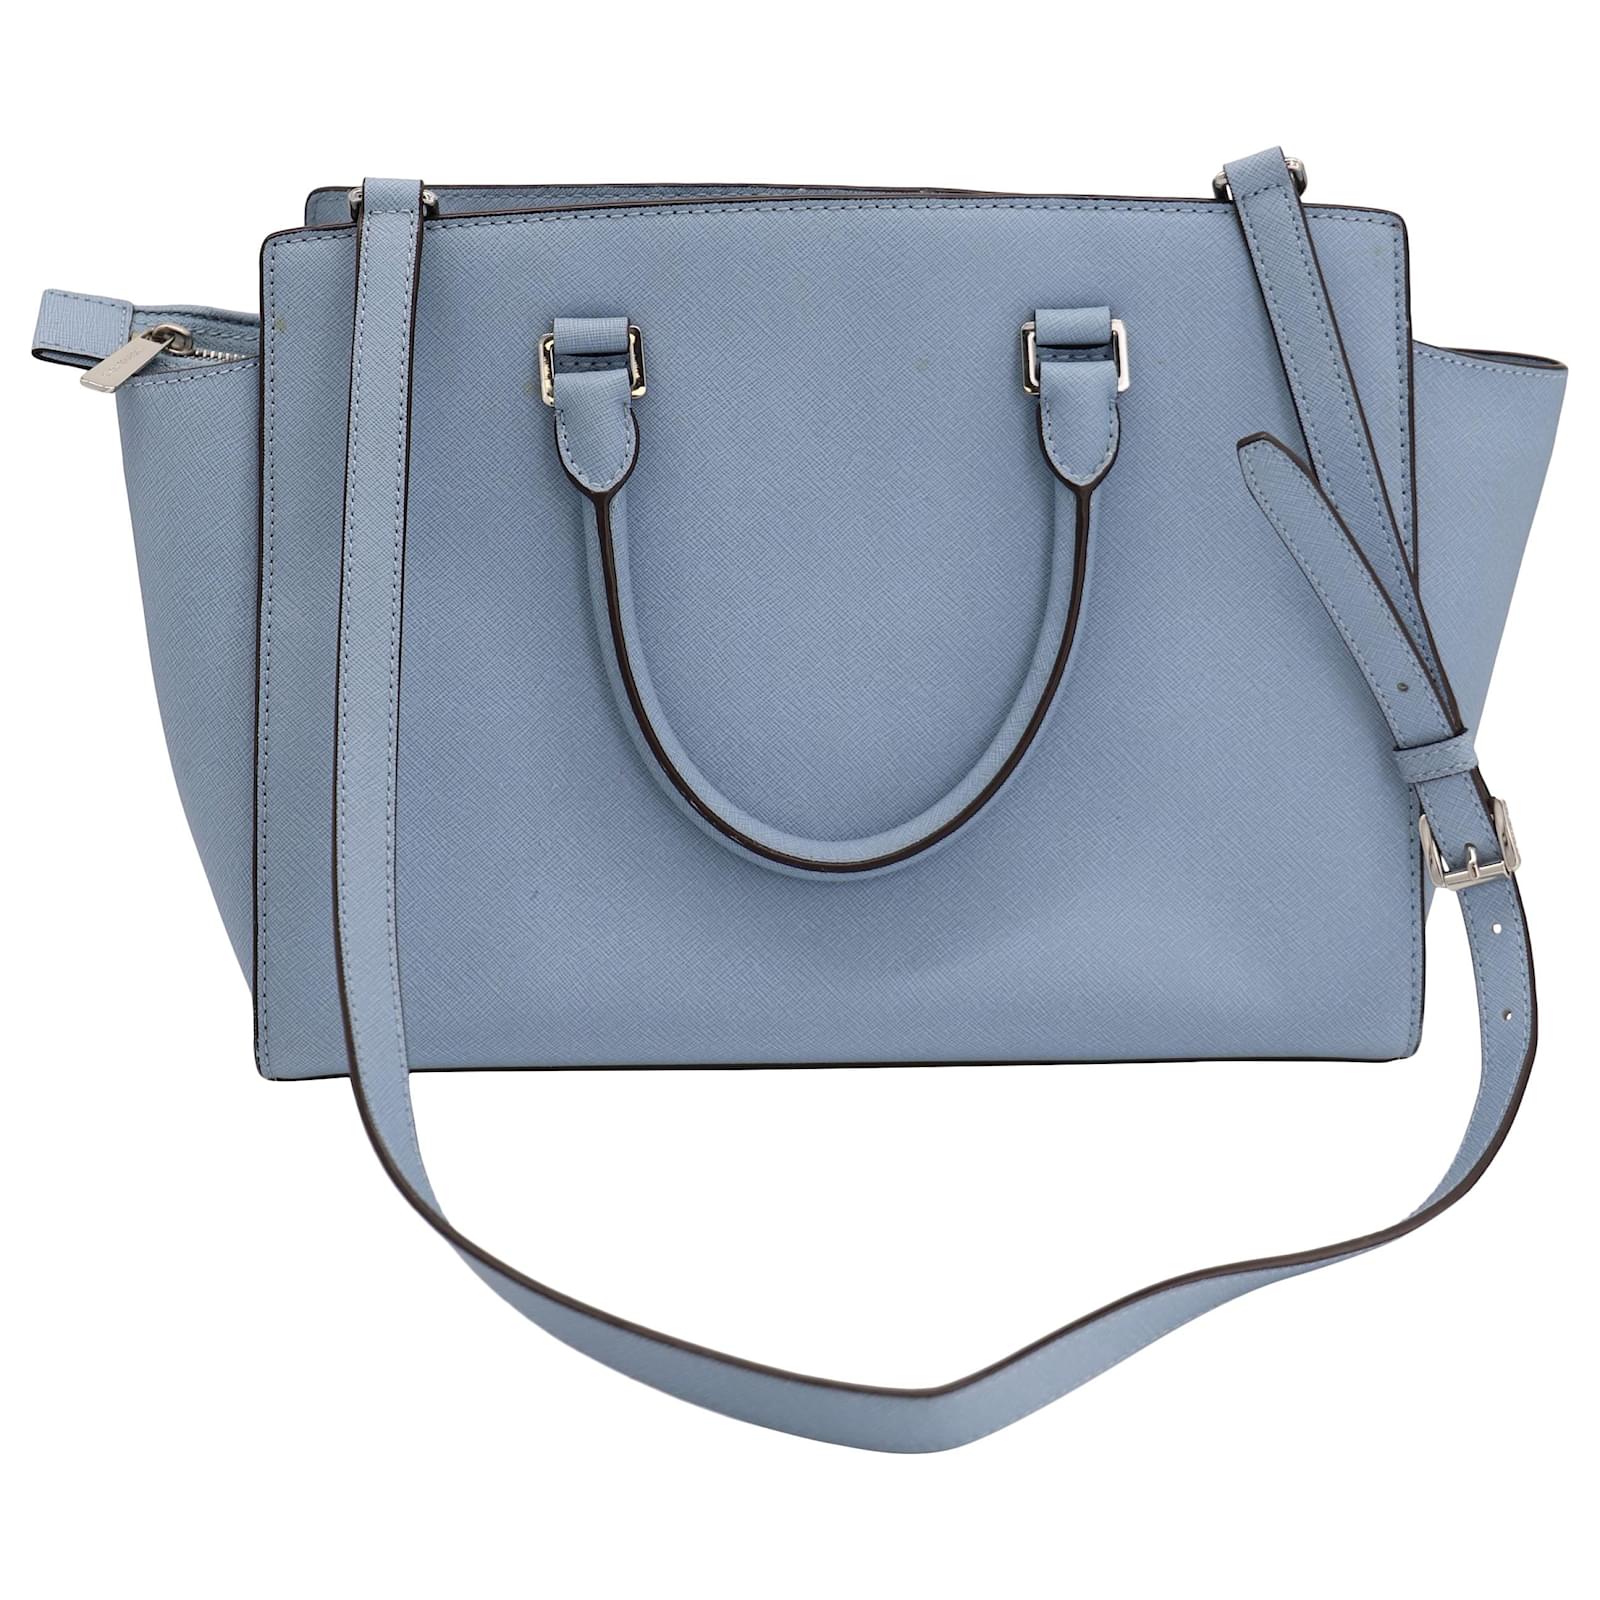 Selma leather tote Michael Kors Blue in Leather - 14798081